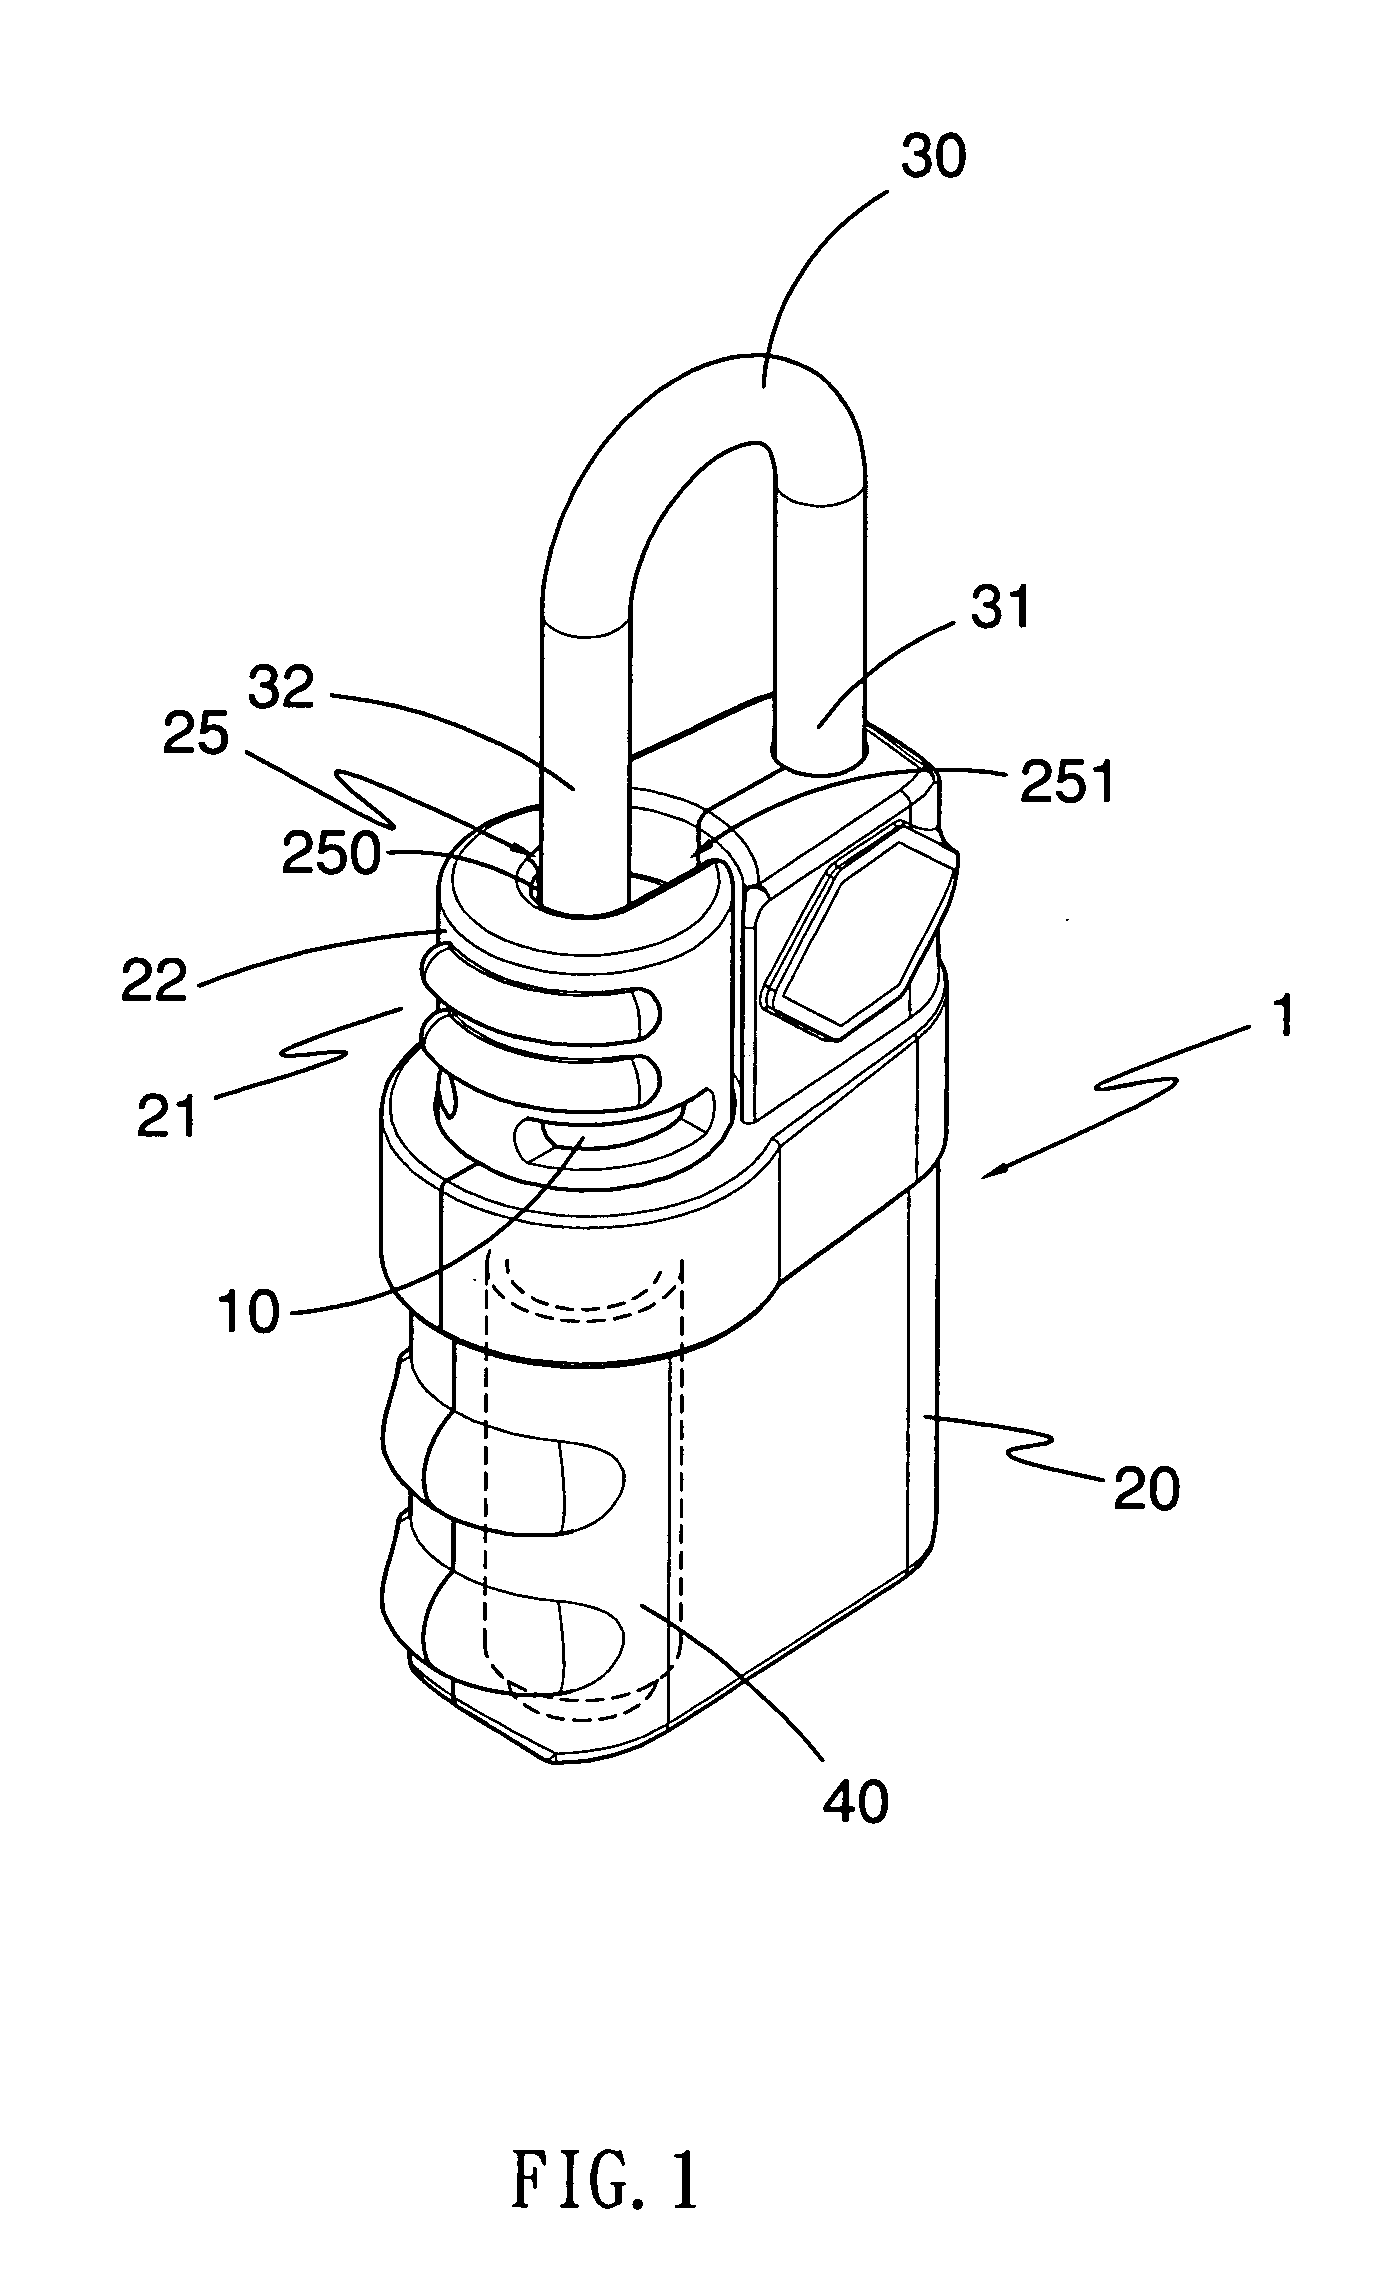 Lock With Indicator And Multiple Key-Actuated Core